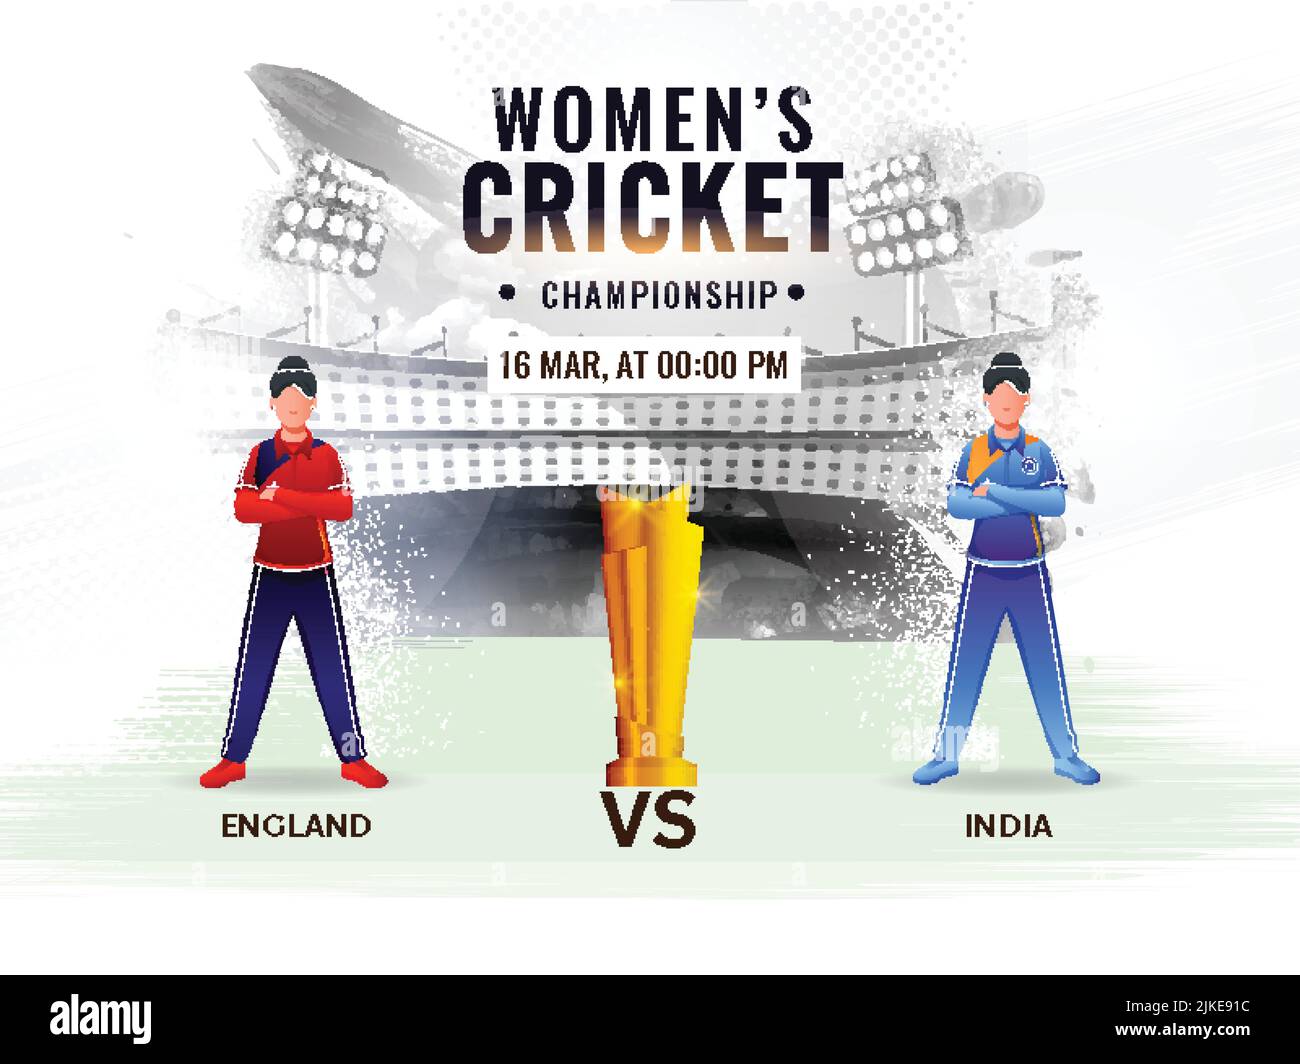 Women's Cricket Match Between England VS India With Faceless Players And Golden Trophy Cup On Abstract Grunge Stadium View. Stock Vector